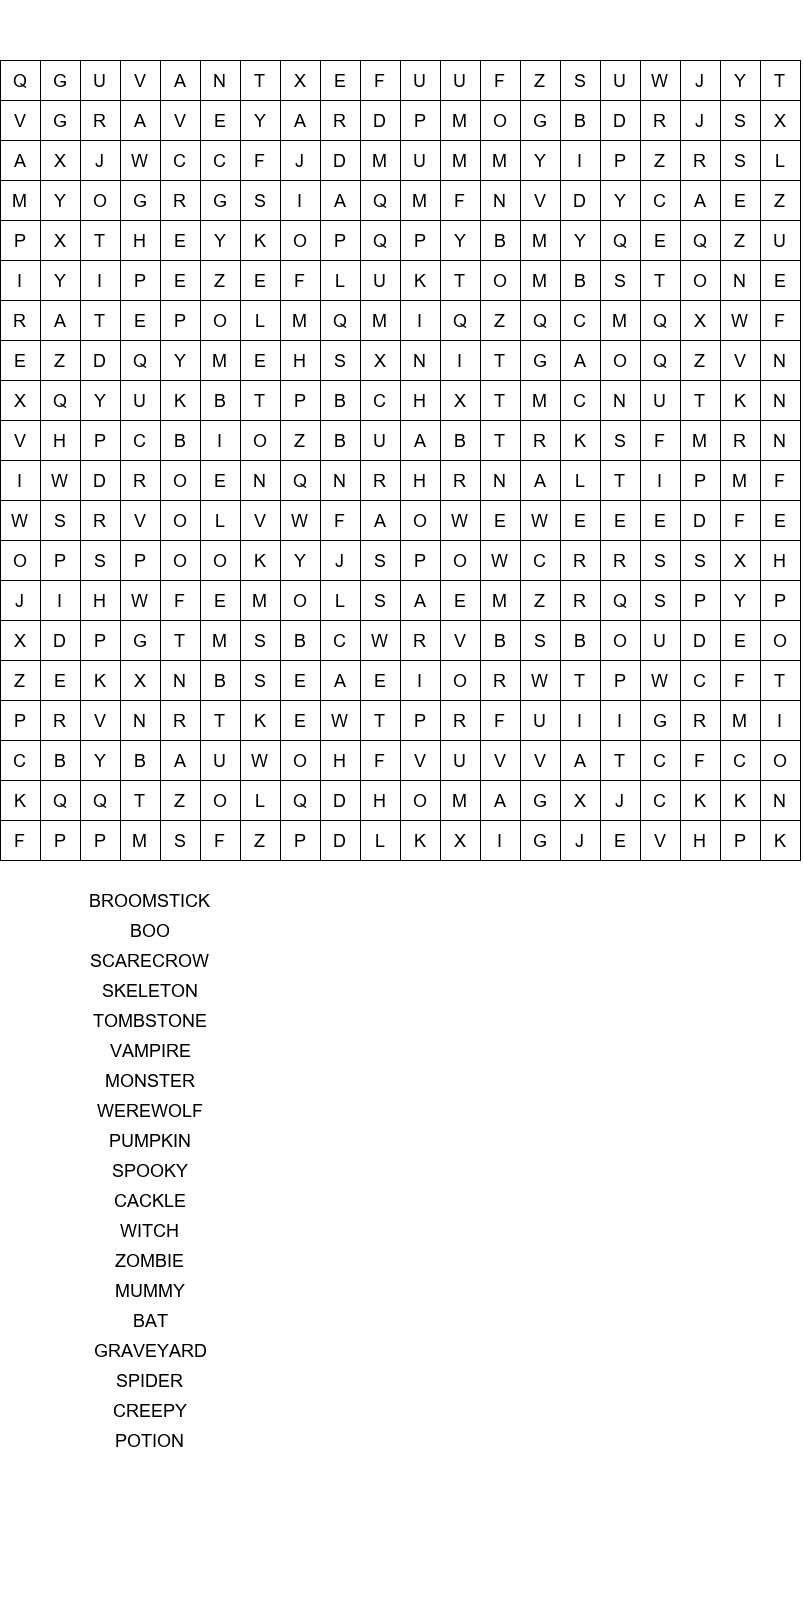 spooktacular halloween word search answer key size 20x20